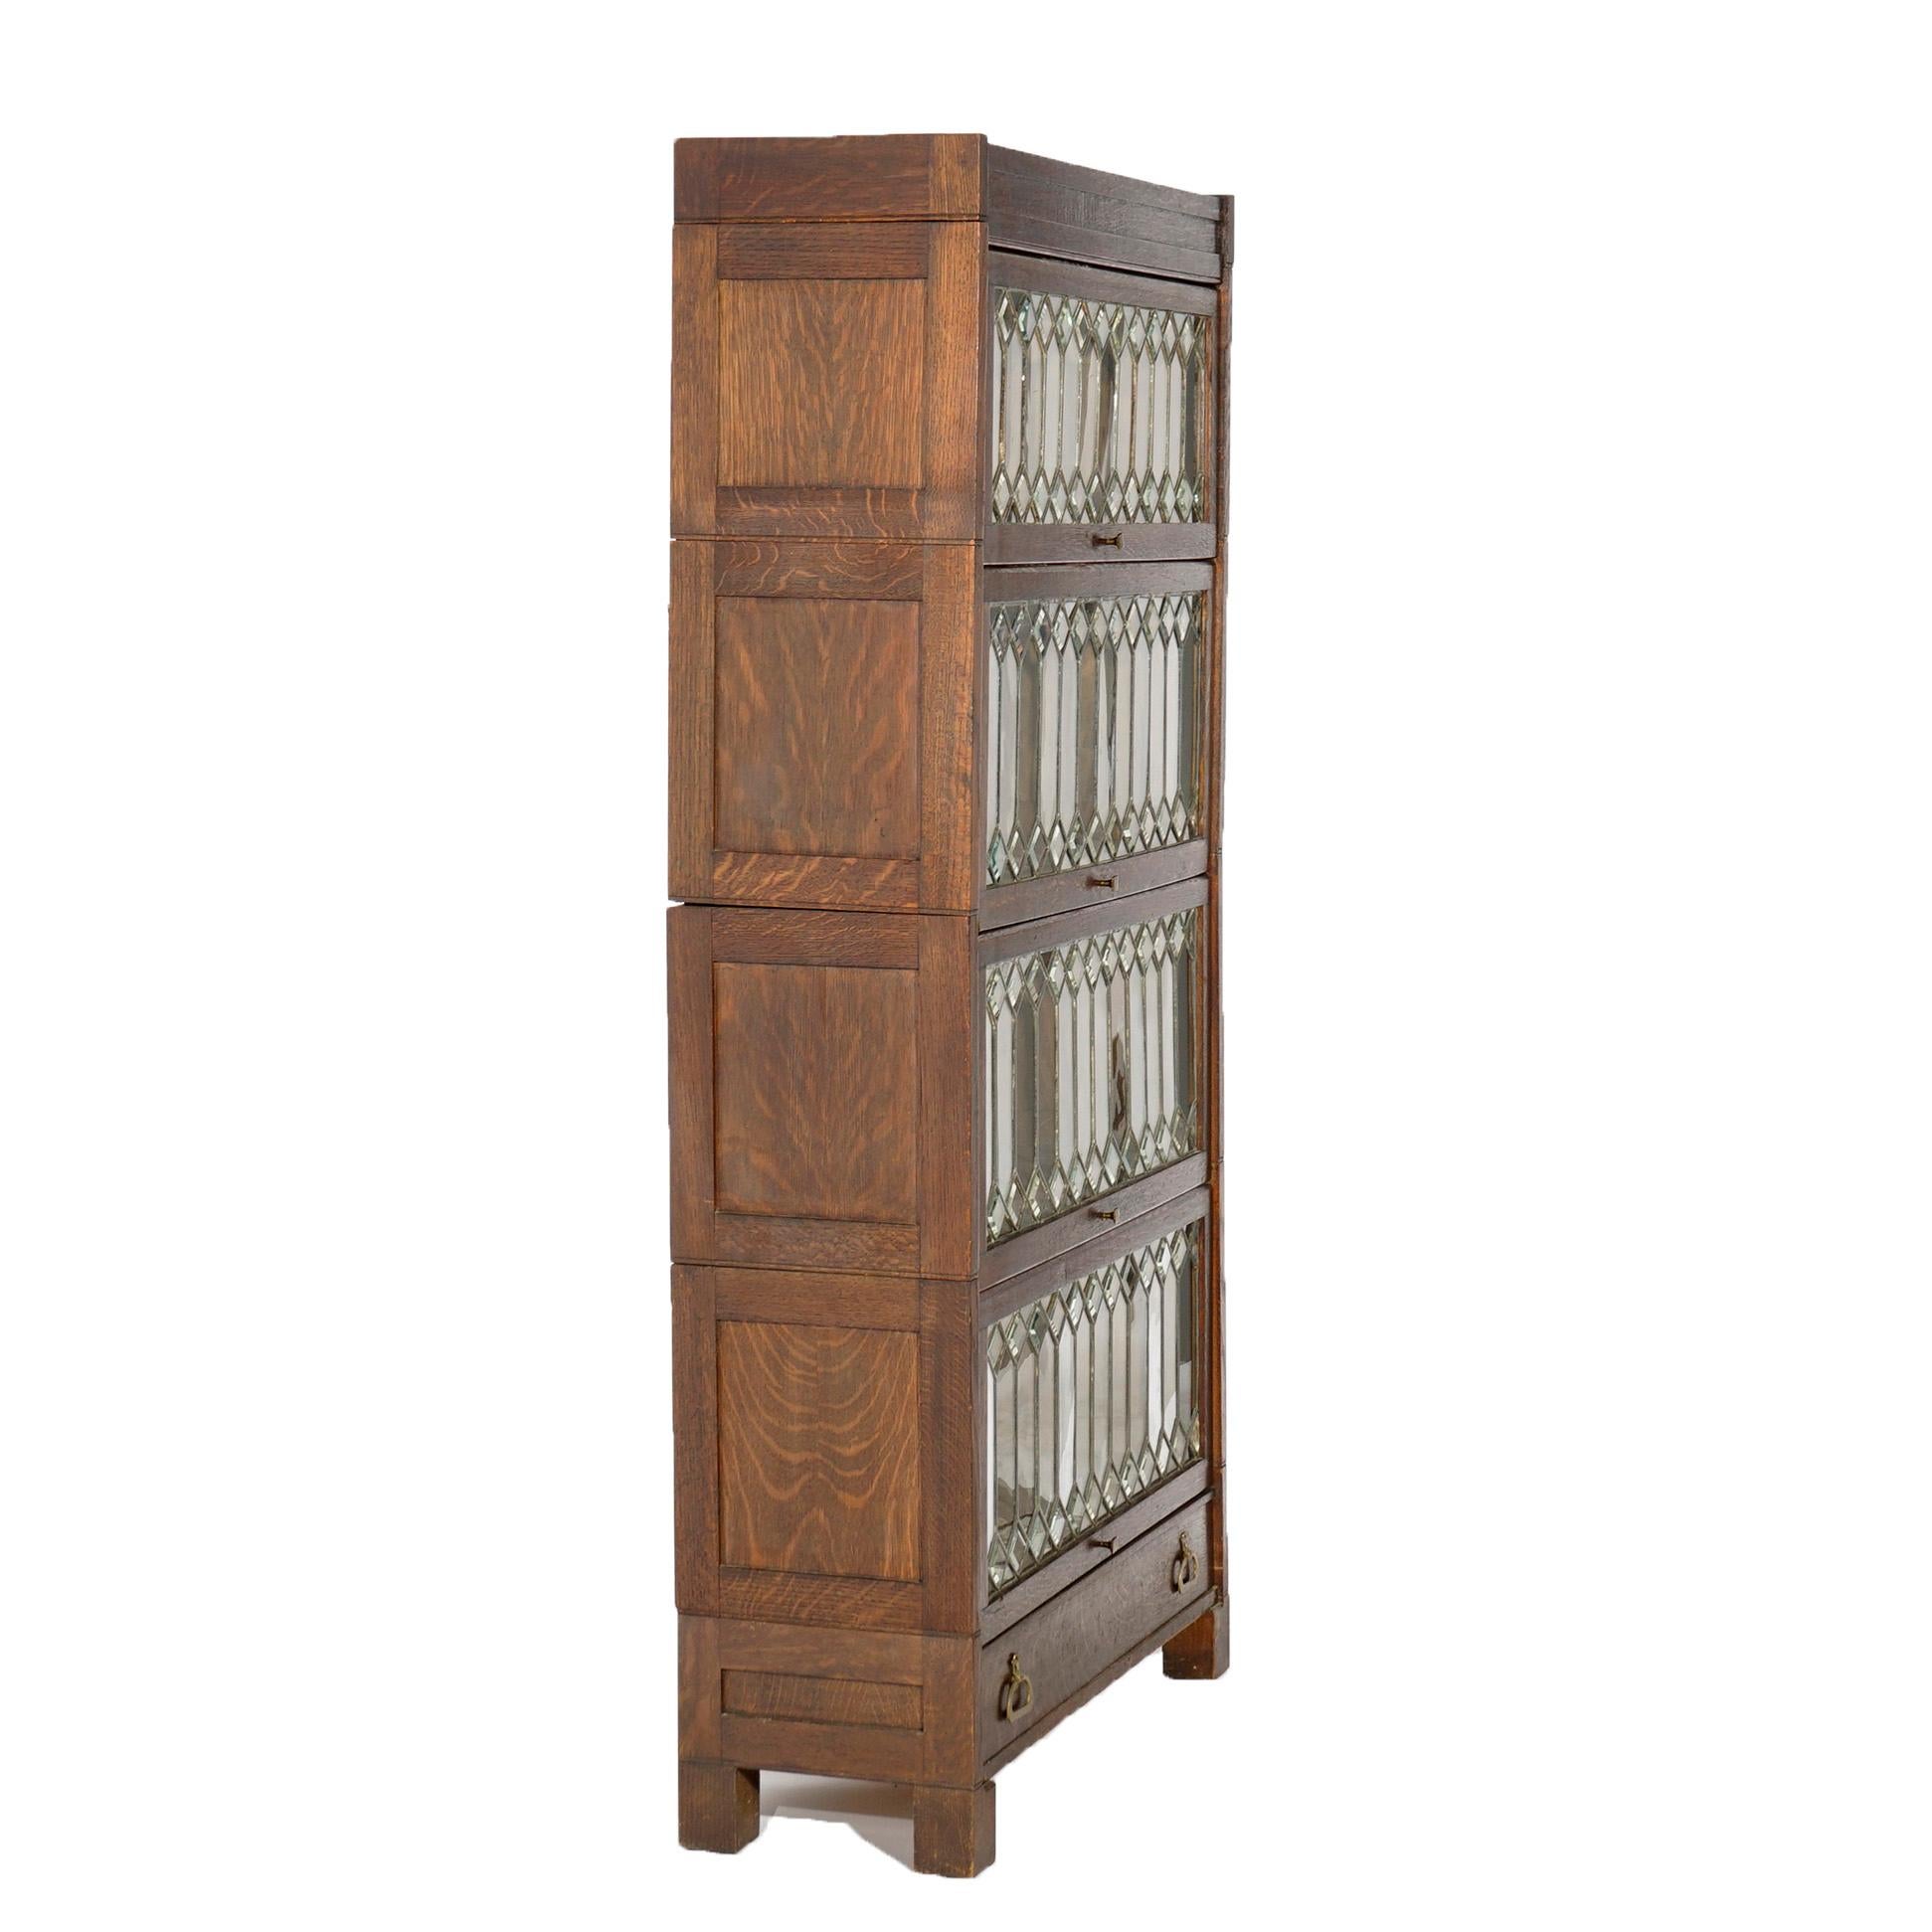 American Antique Arts&Crafts Mission Oak&Leaded Glass Barrister Stack Bookcase circa 1910